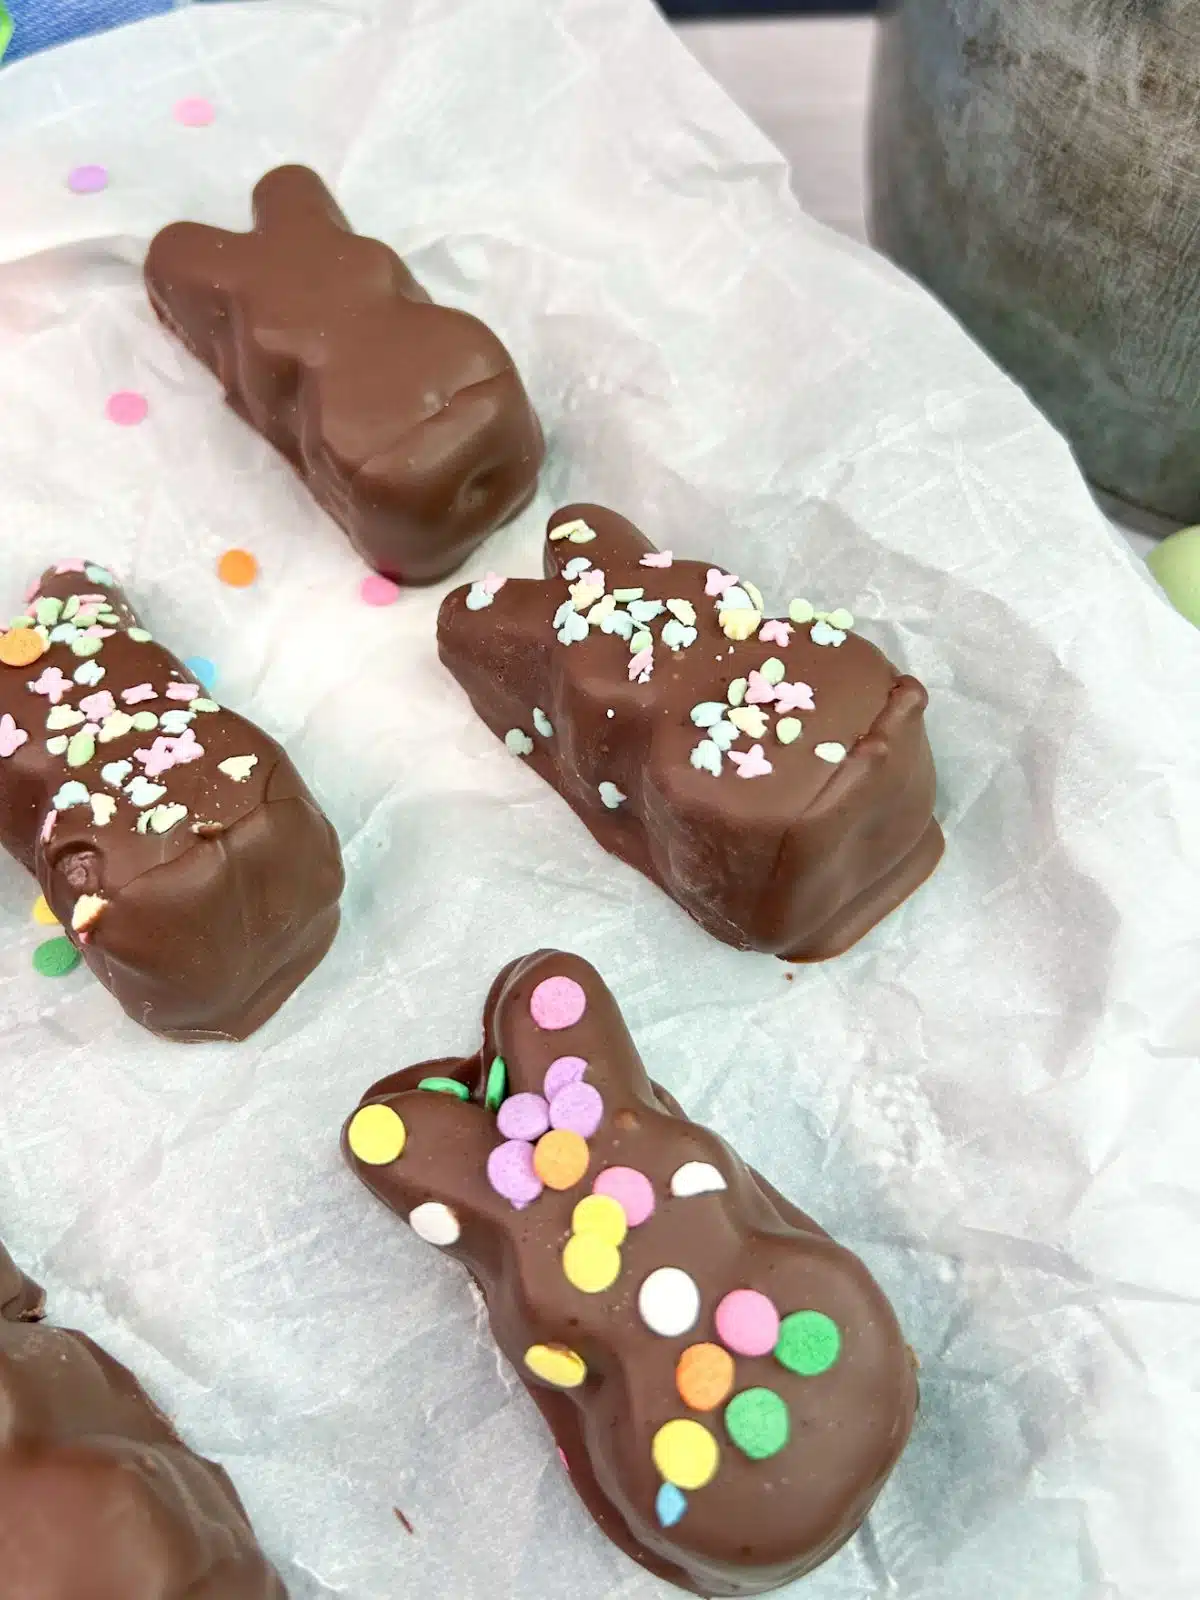 chocolate bunnies with sprinkles on white parchment paper.